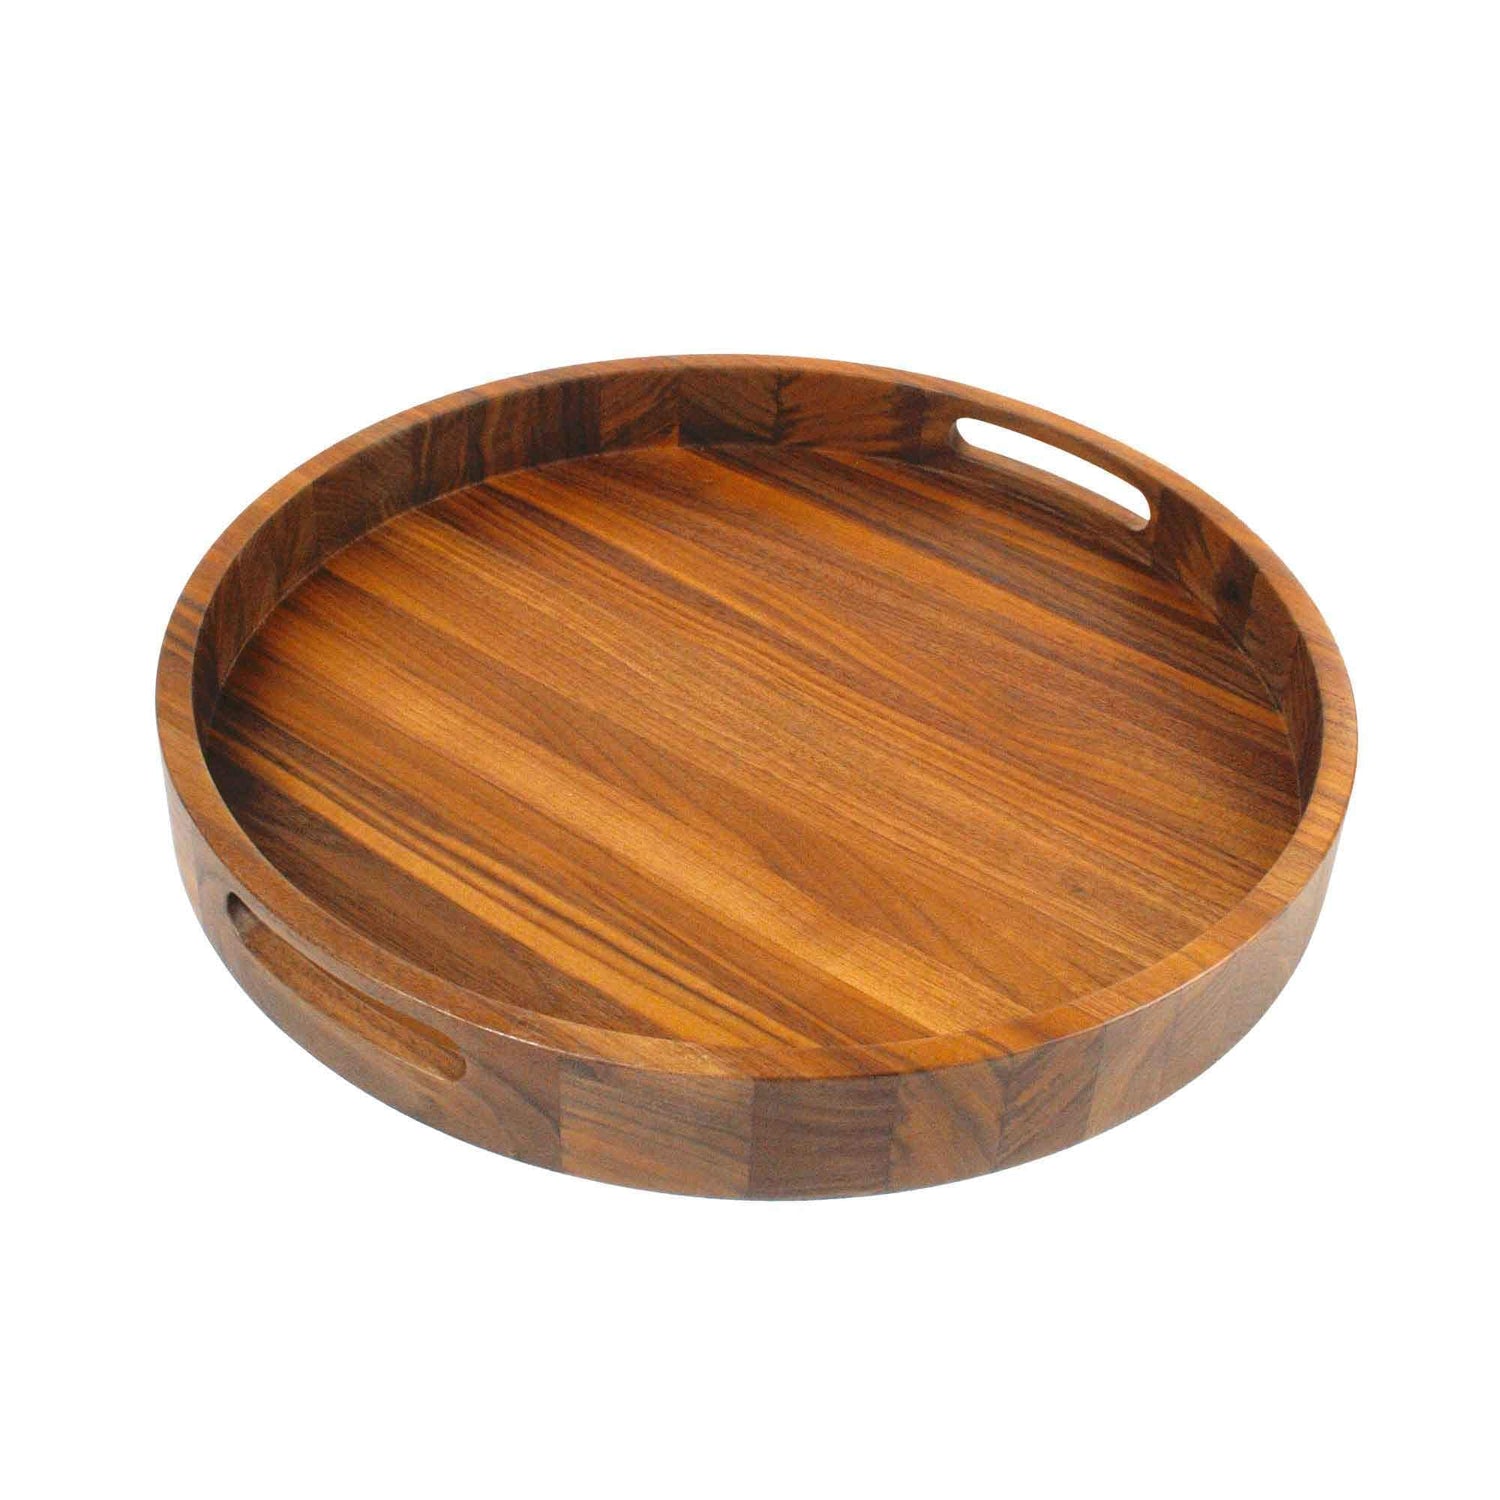 16.5 Inch Round Walnut Wood Serving and Coffee Table Tray with Handles